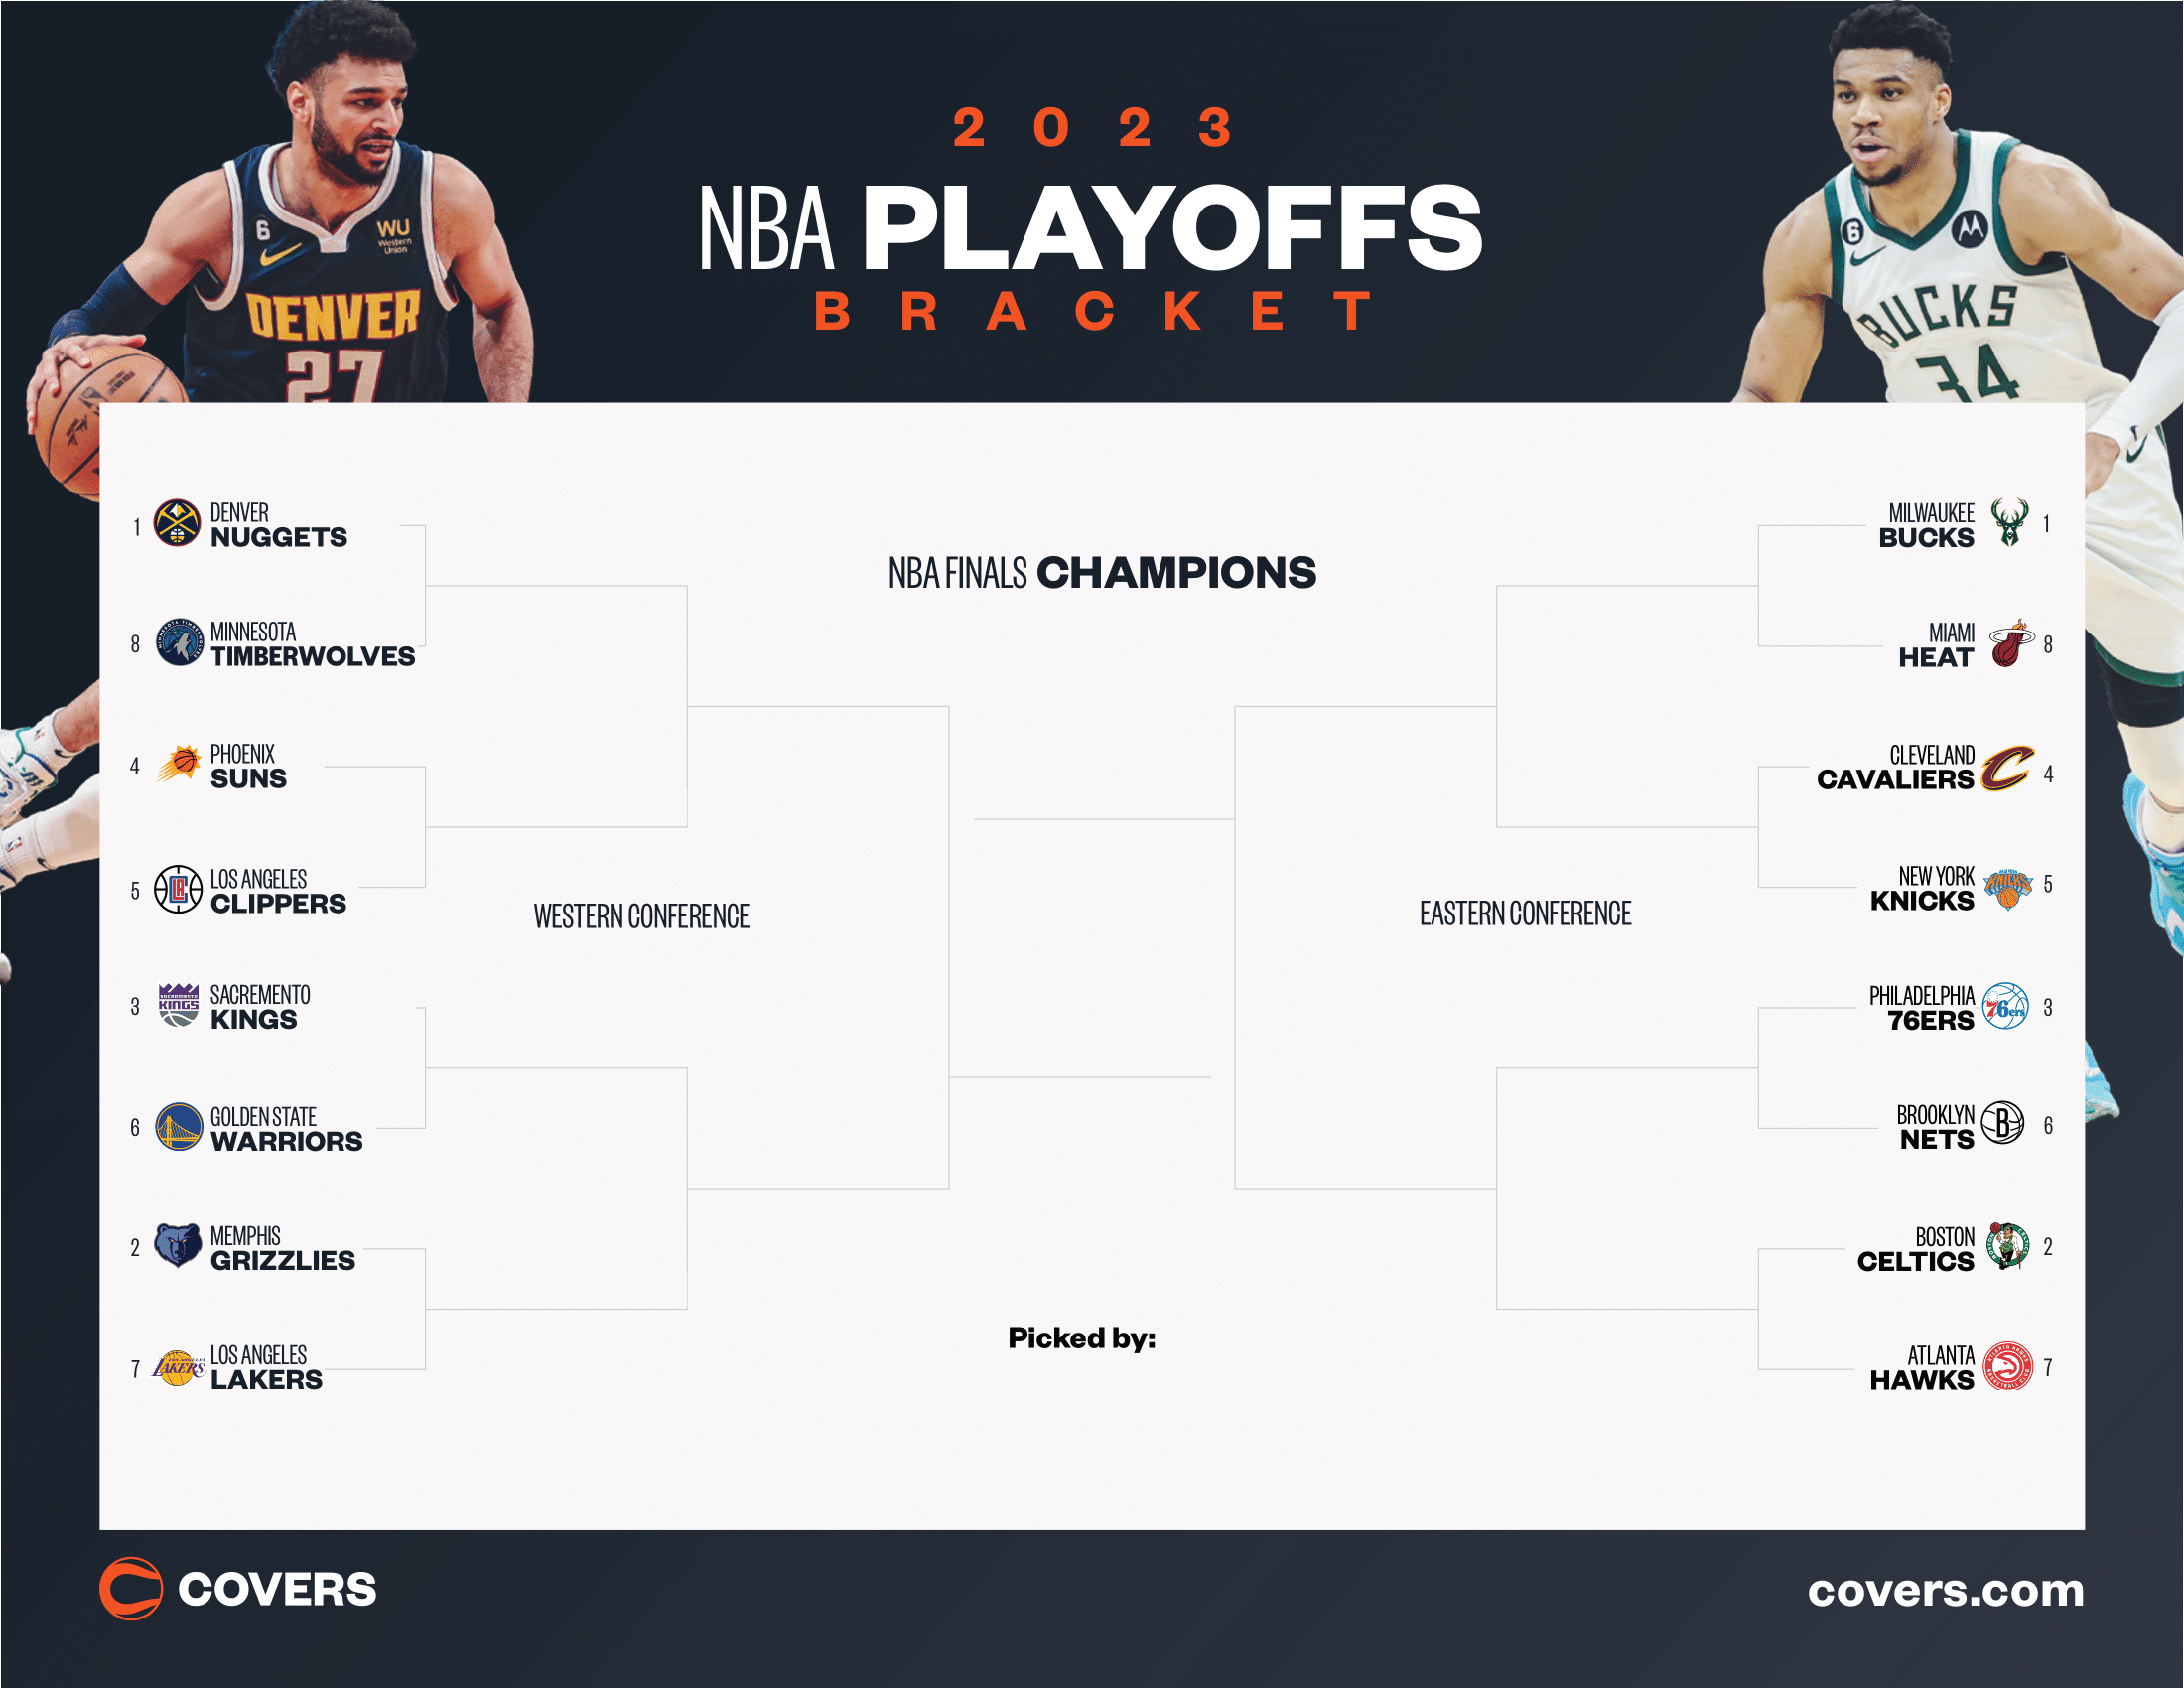 2023 NBA Playoff Bracket Updated Playoff Picture, Standings & Seeding